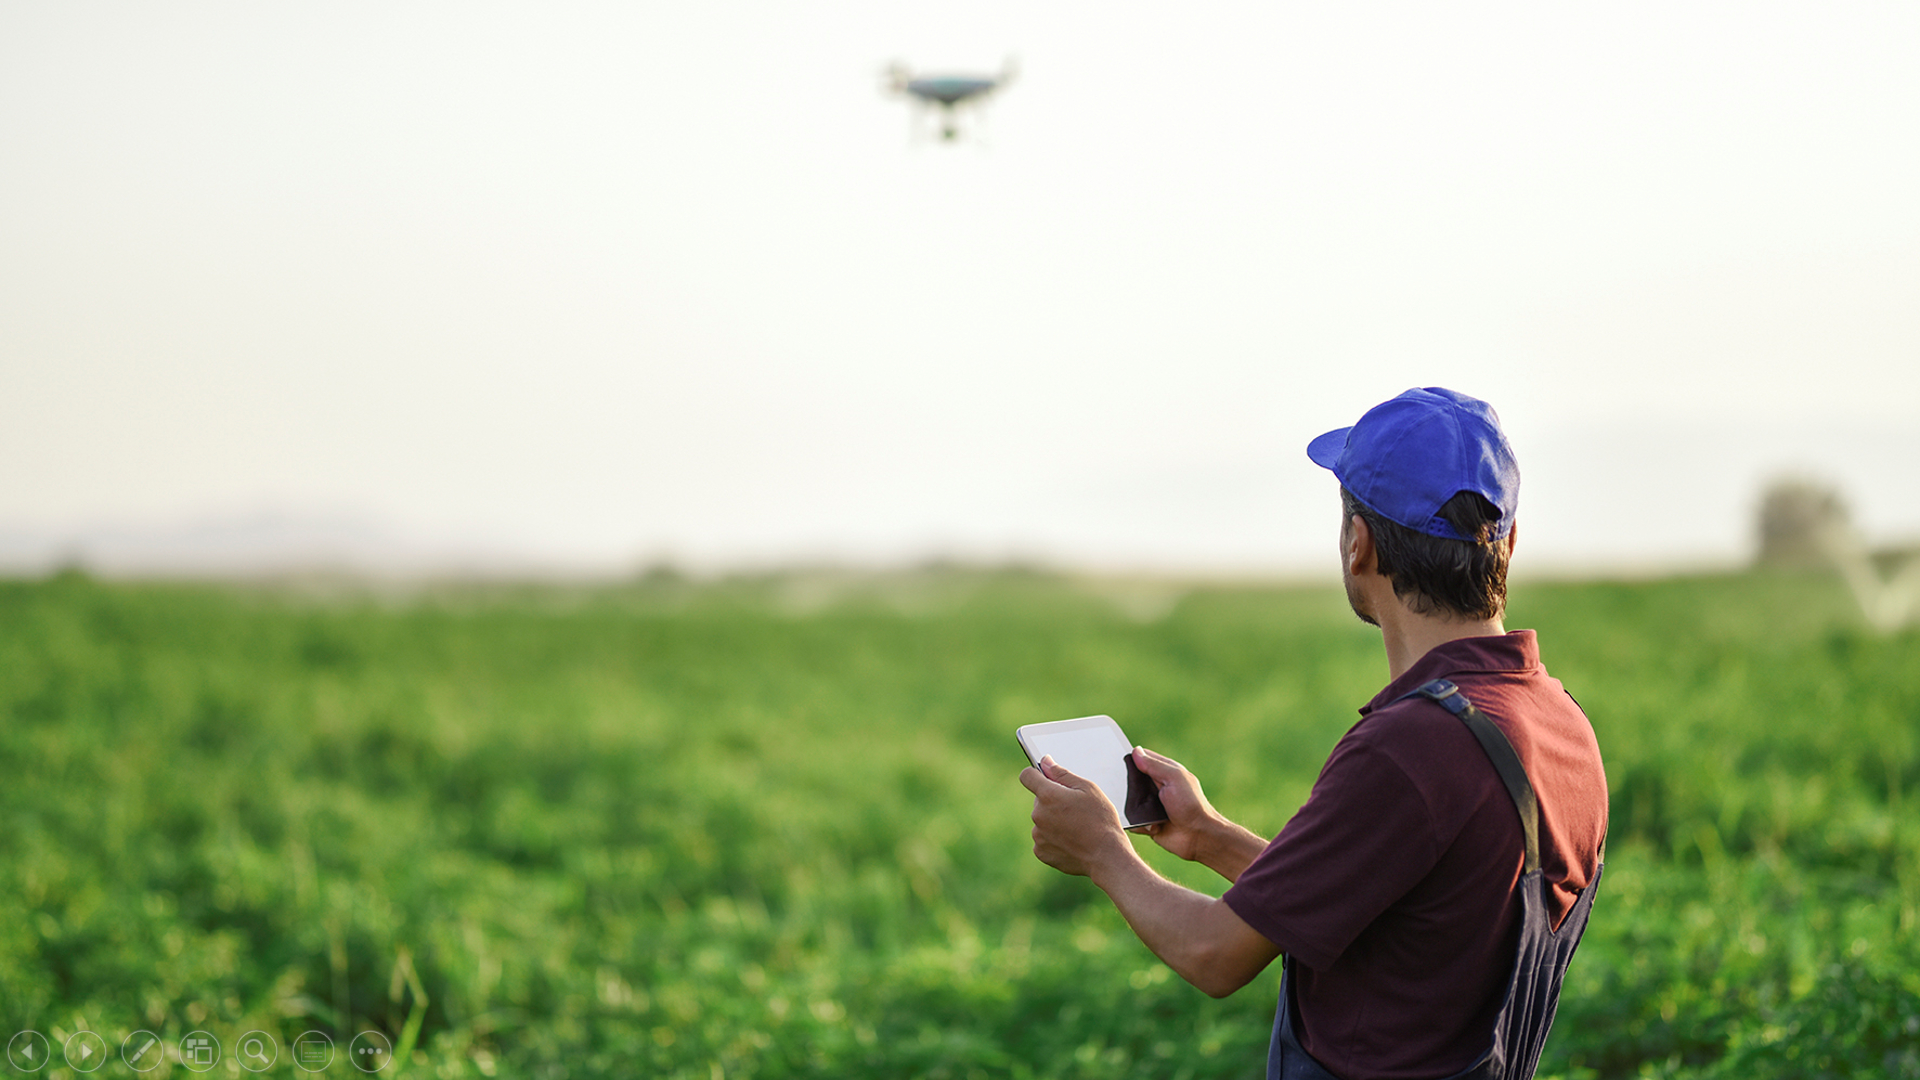 A key element to reach the full potential of digital farming is easy, secured and automated data sharing.